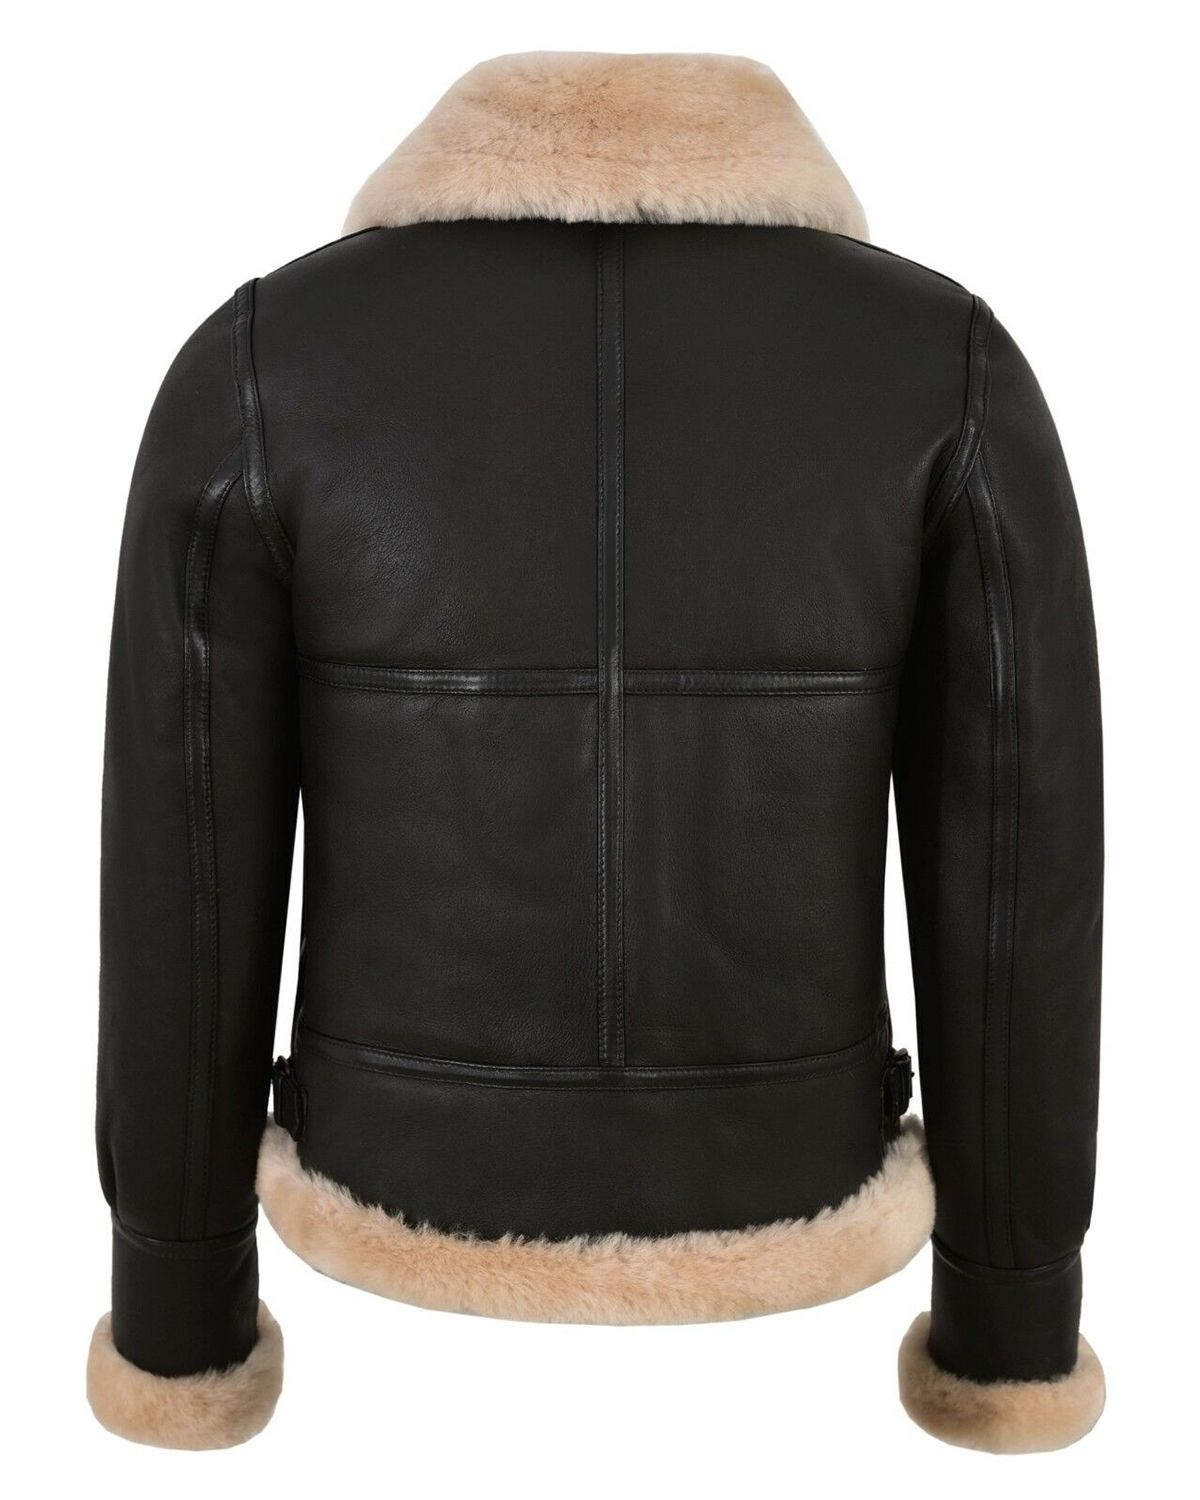 shearling leather jacket for women soft fur collar jacket women winter jacket black bomber jacket for women genuine leather jacket